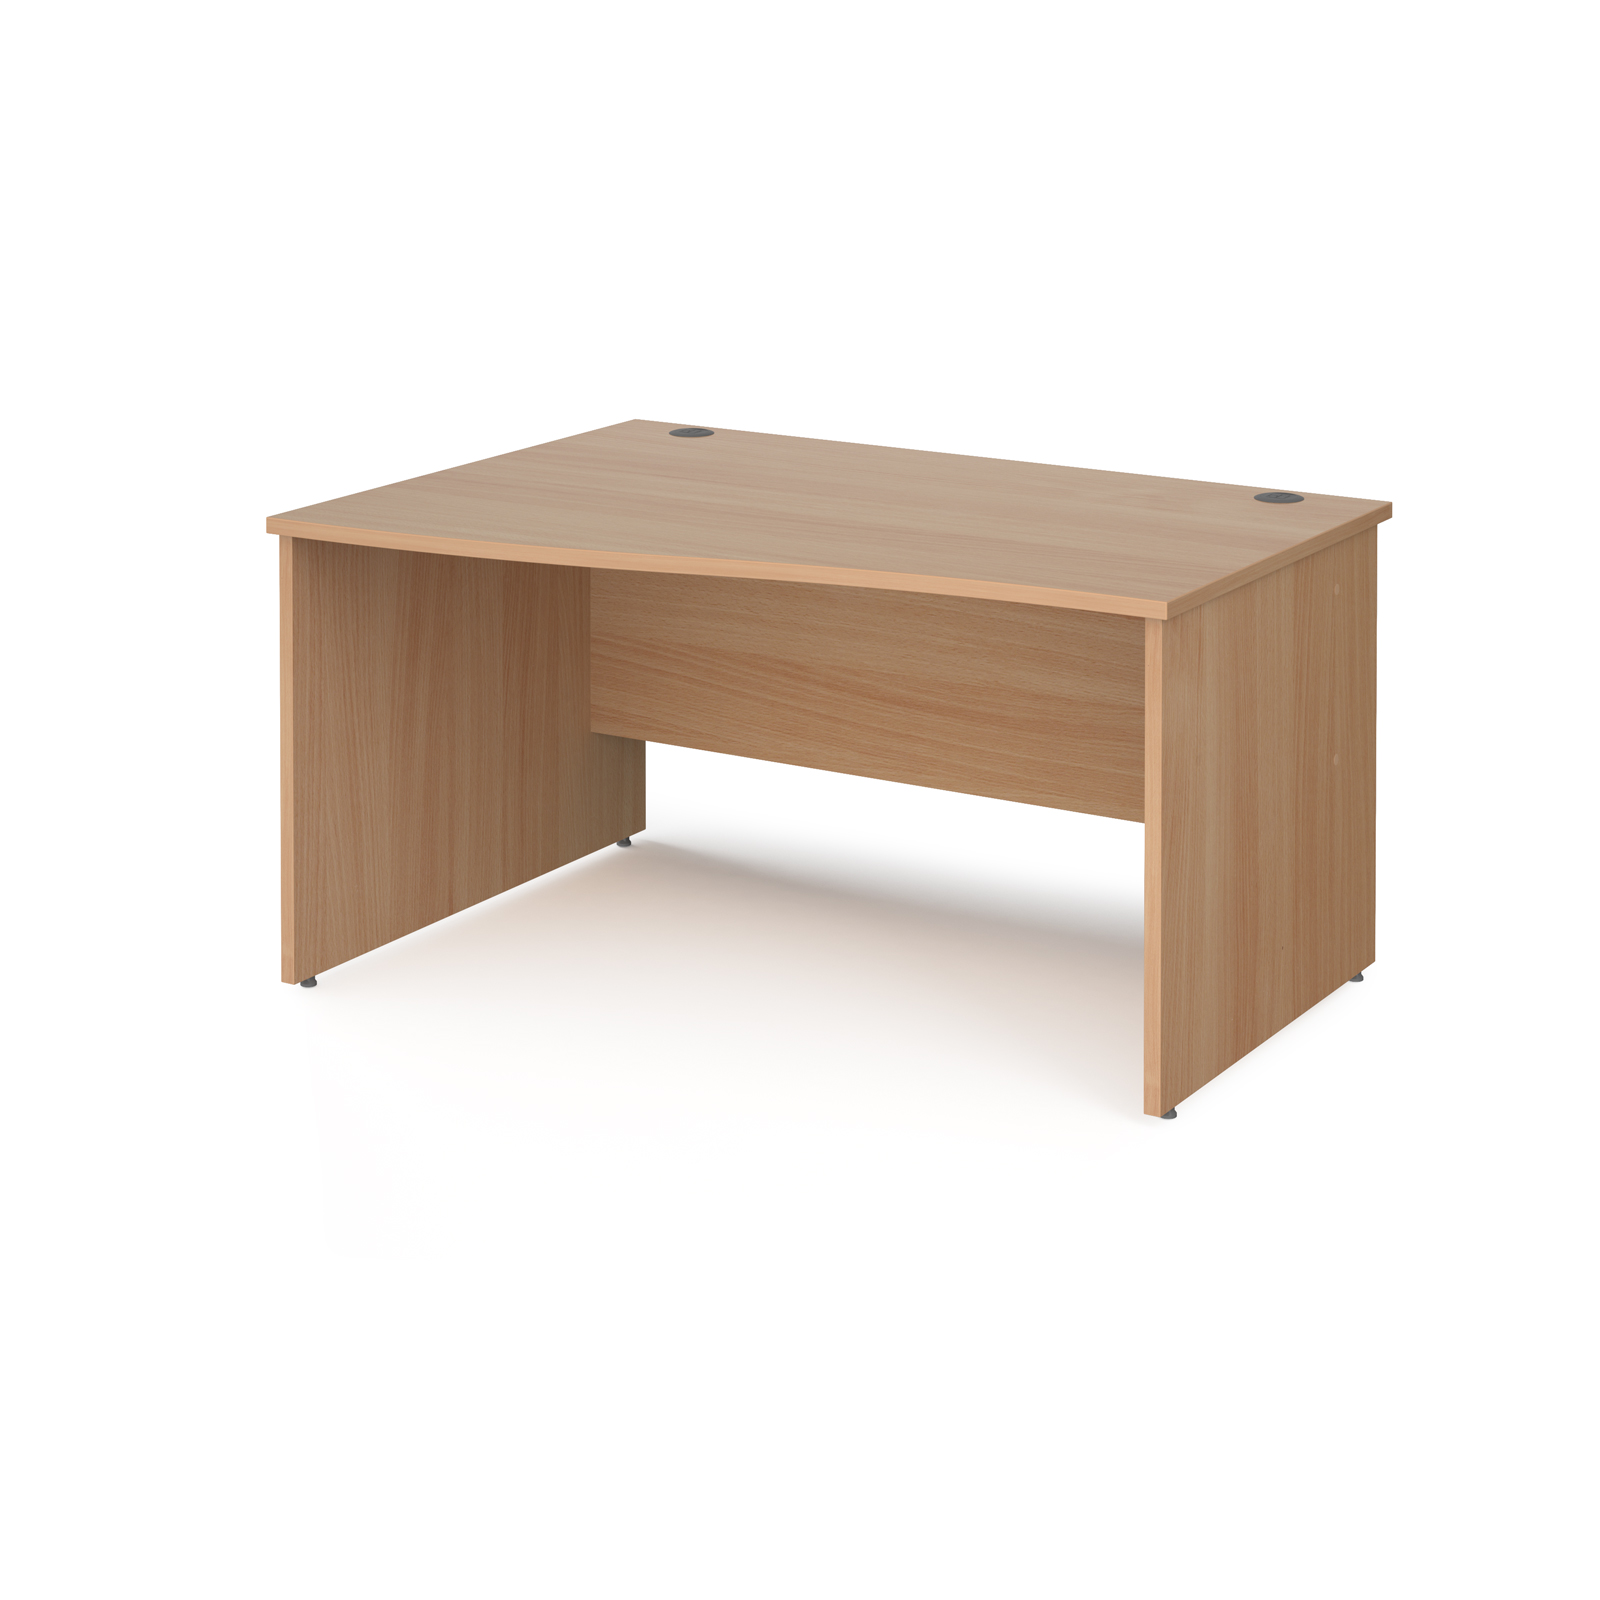 Maestro 25 left hand wave desk 1400mm wide - beech top with panel end leg